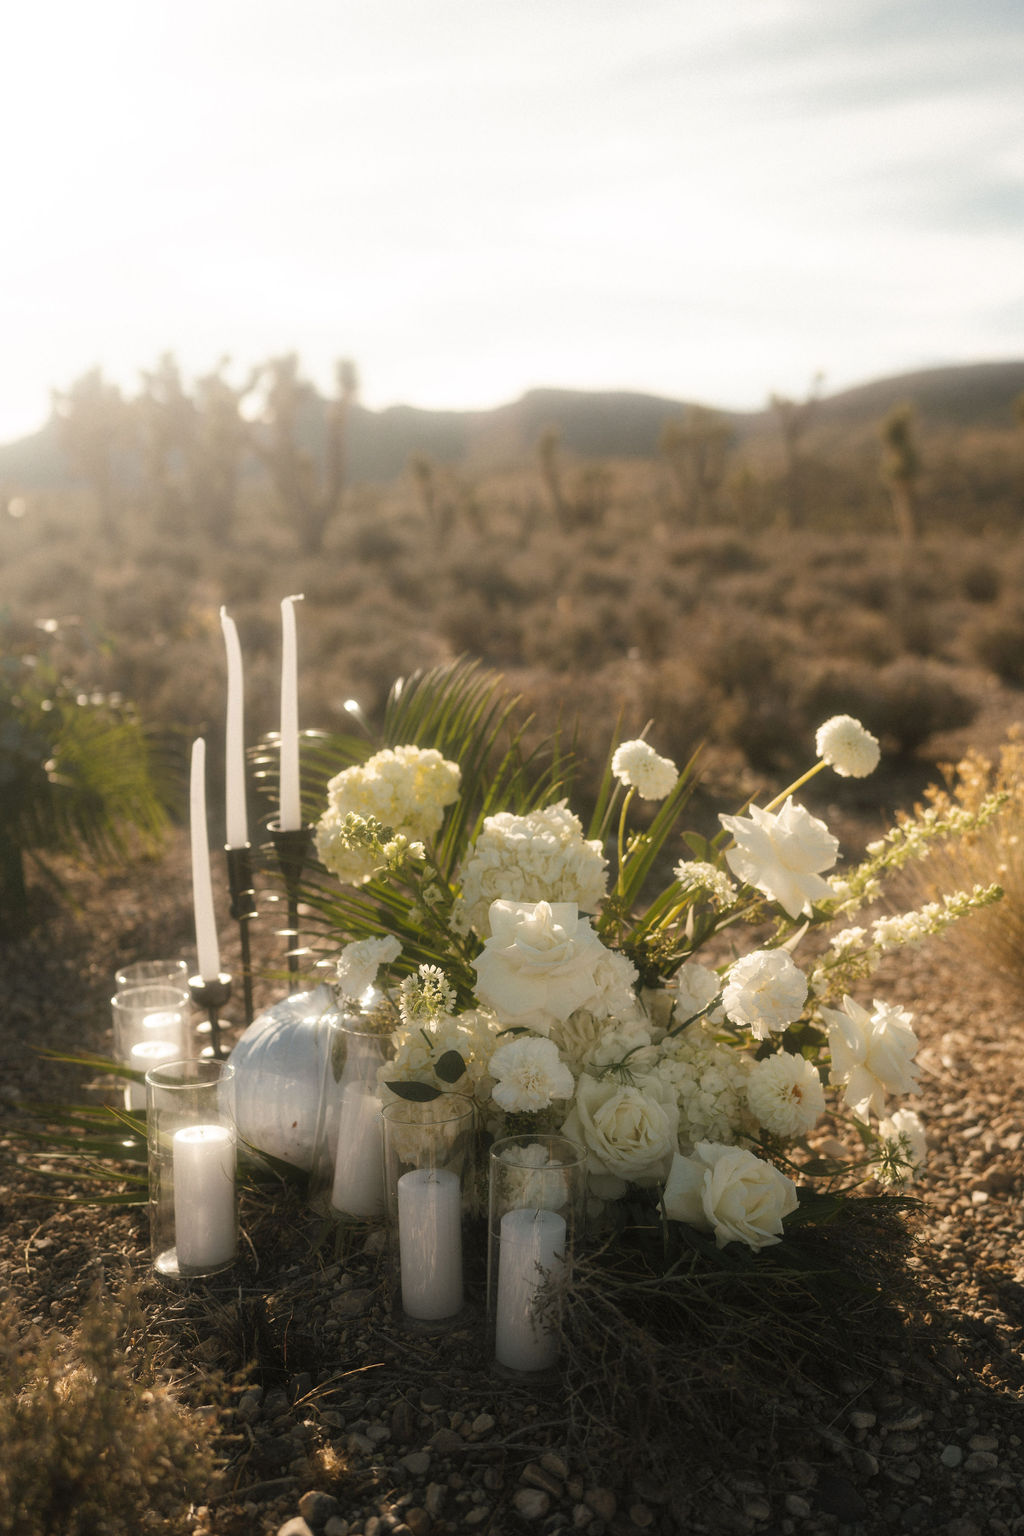 A floral arrangement with white flowers and several lit white candles is set up on the ground in a desert landscape under a bright sky for a halloween wedding